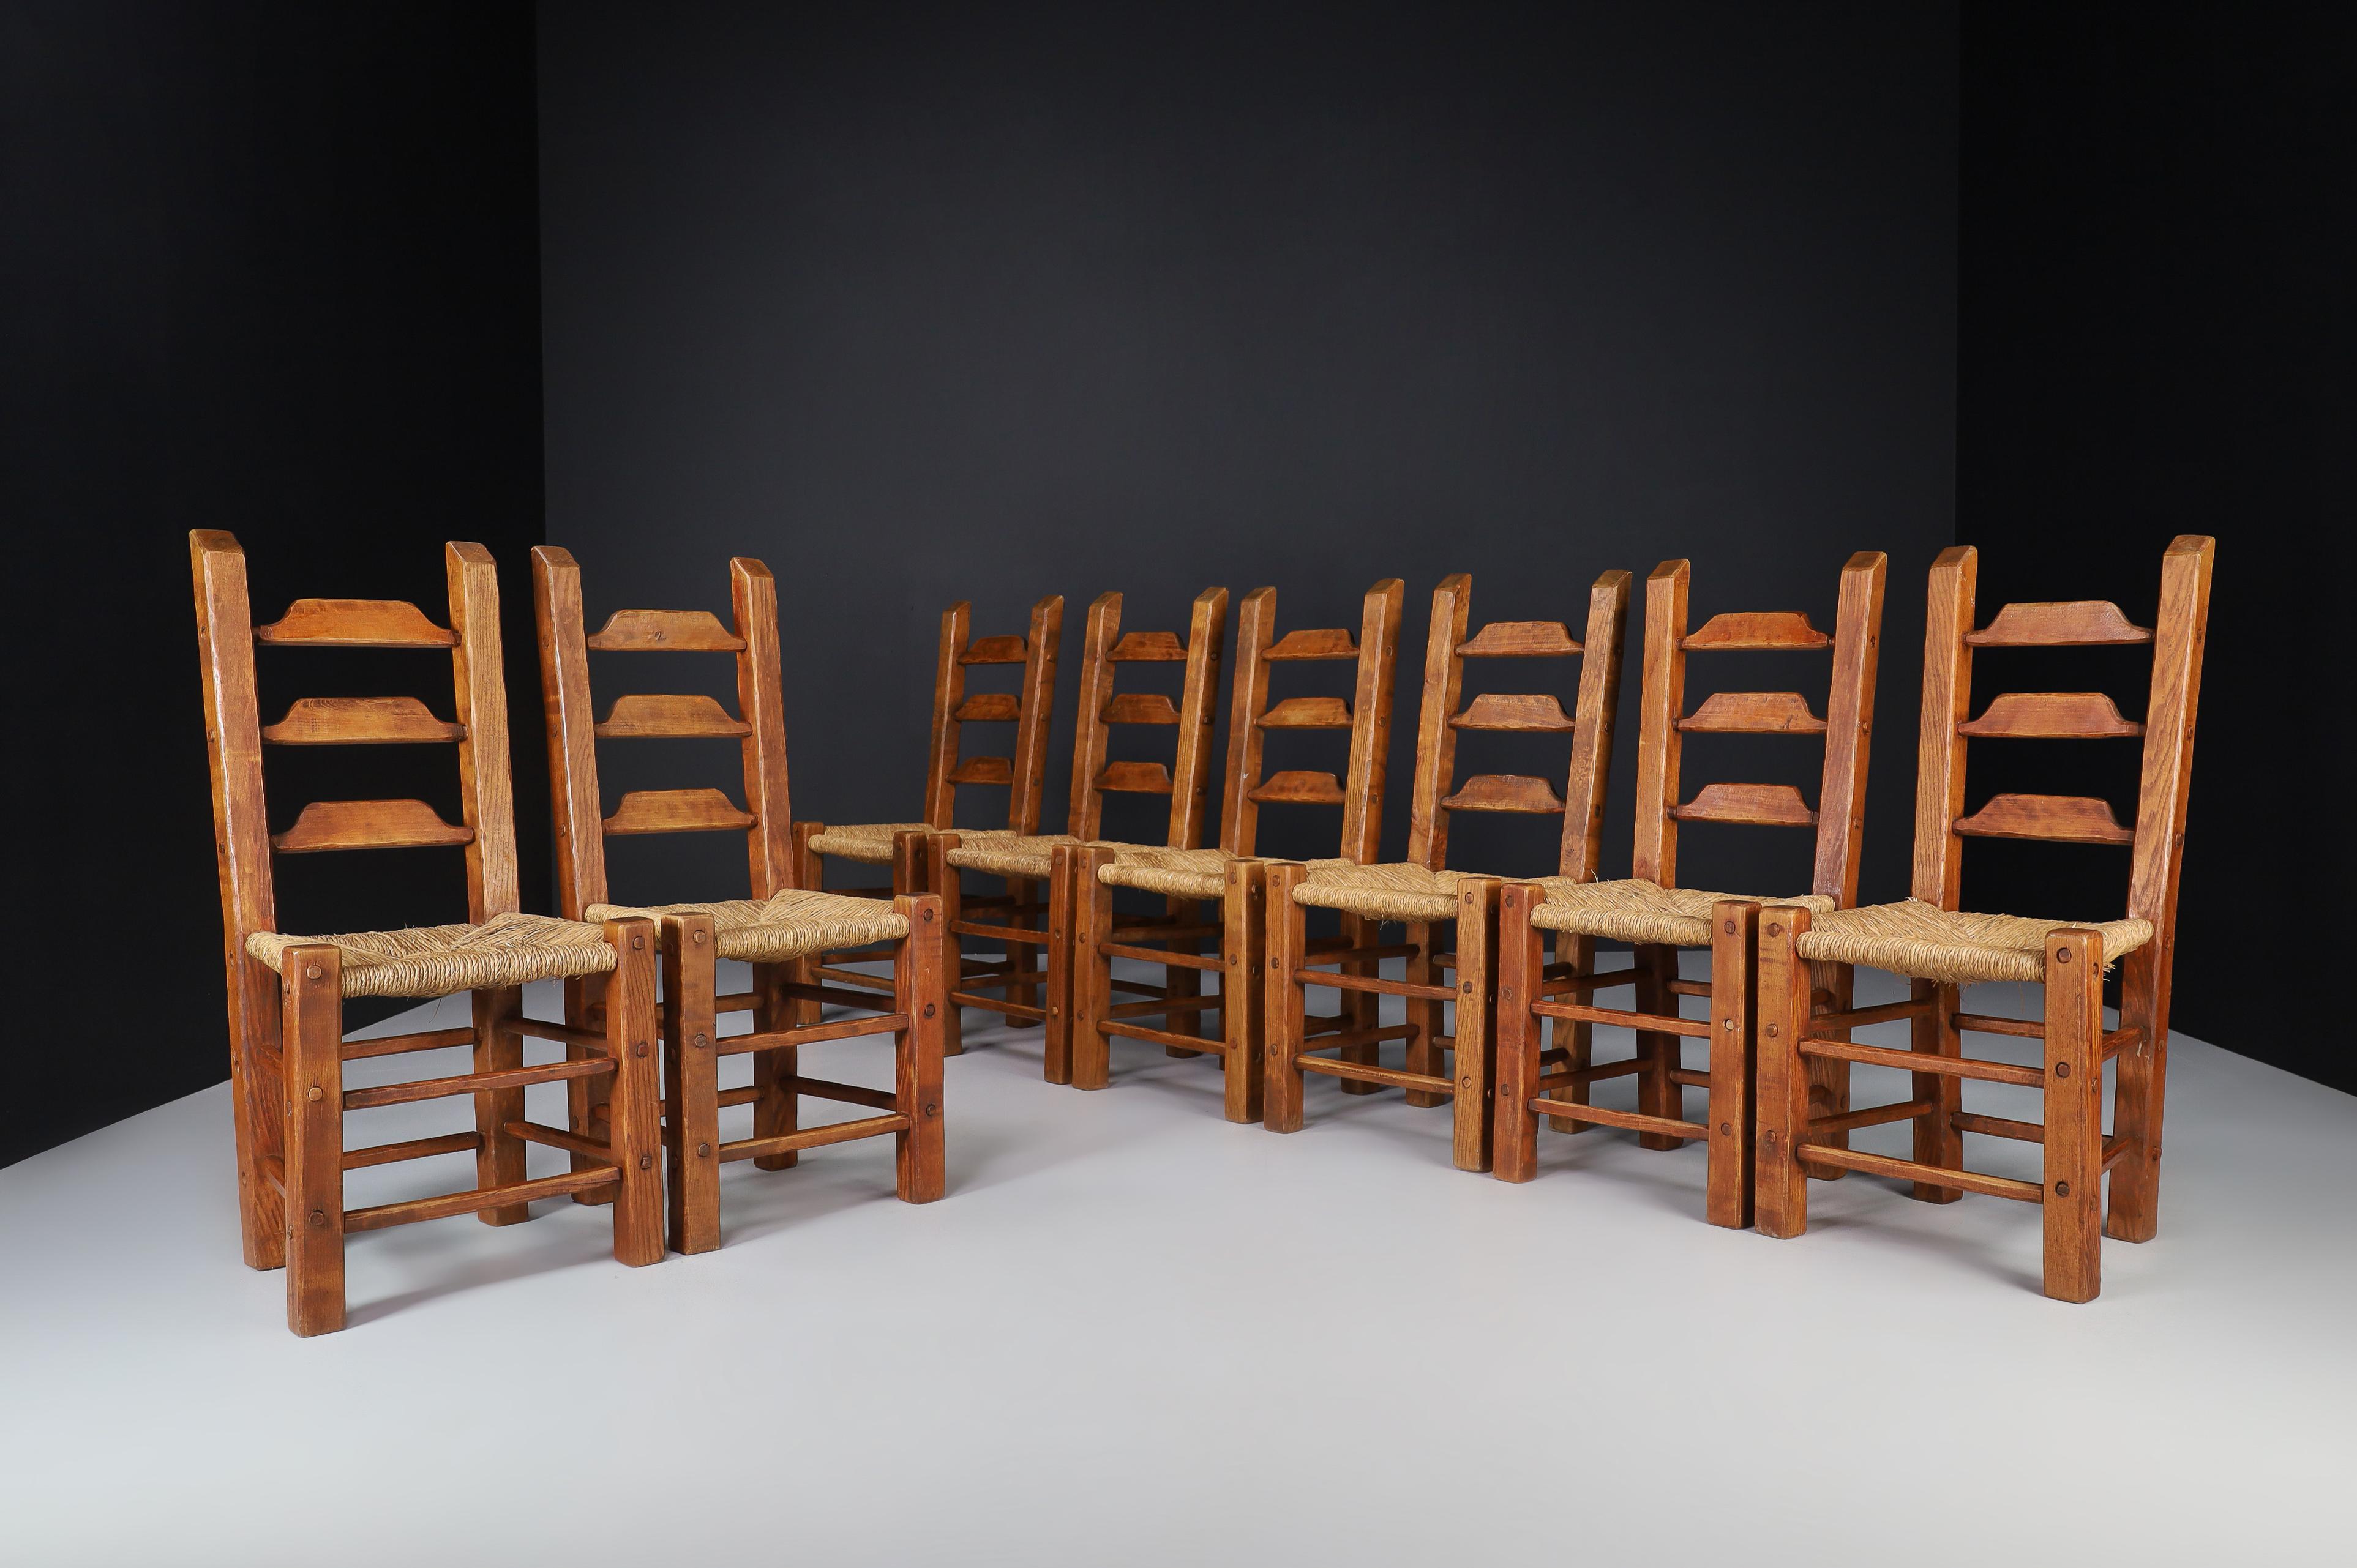 Rustic dining chairs in oak and rush, Spain 1960s.

Set of 8 mountain or chalet chairs made by an unknown Spanish cabinetmaker in the 1960s. The structure is of solid oak with robust legs, and the seat is woven rush. The grain of the wood is